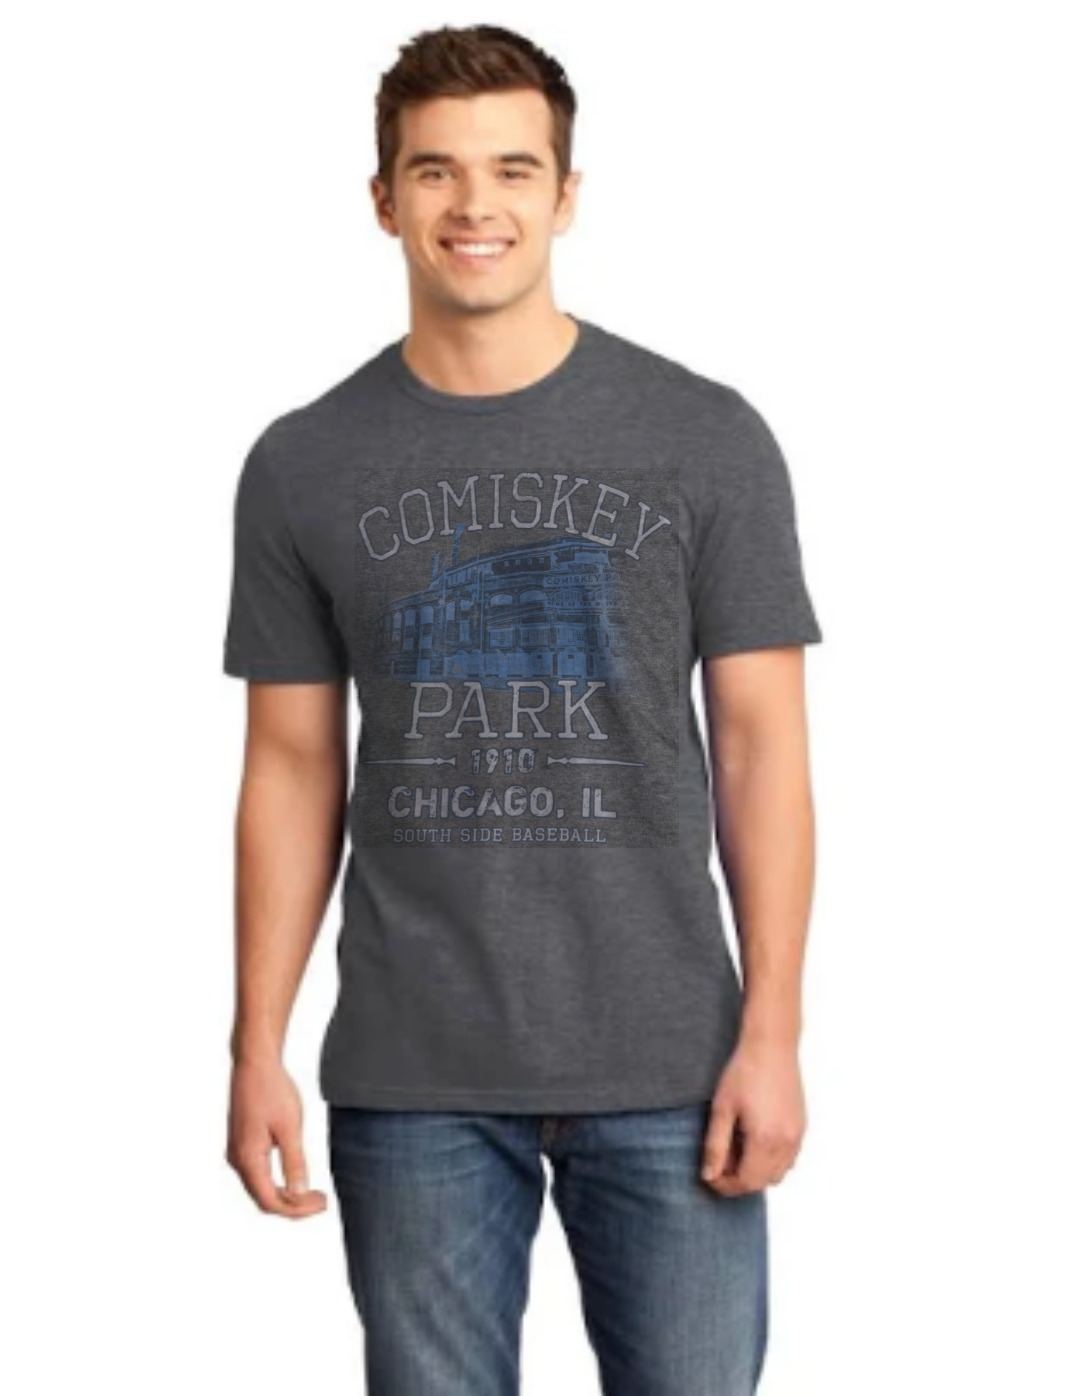 Mens Comiskey Park 35th and Shields Heather Charcoal Tri Blend Tee By Beantown Brand